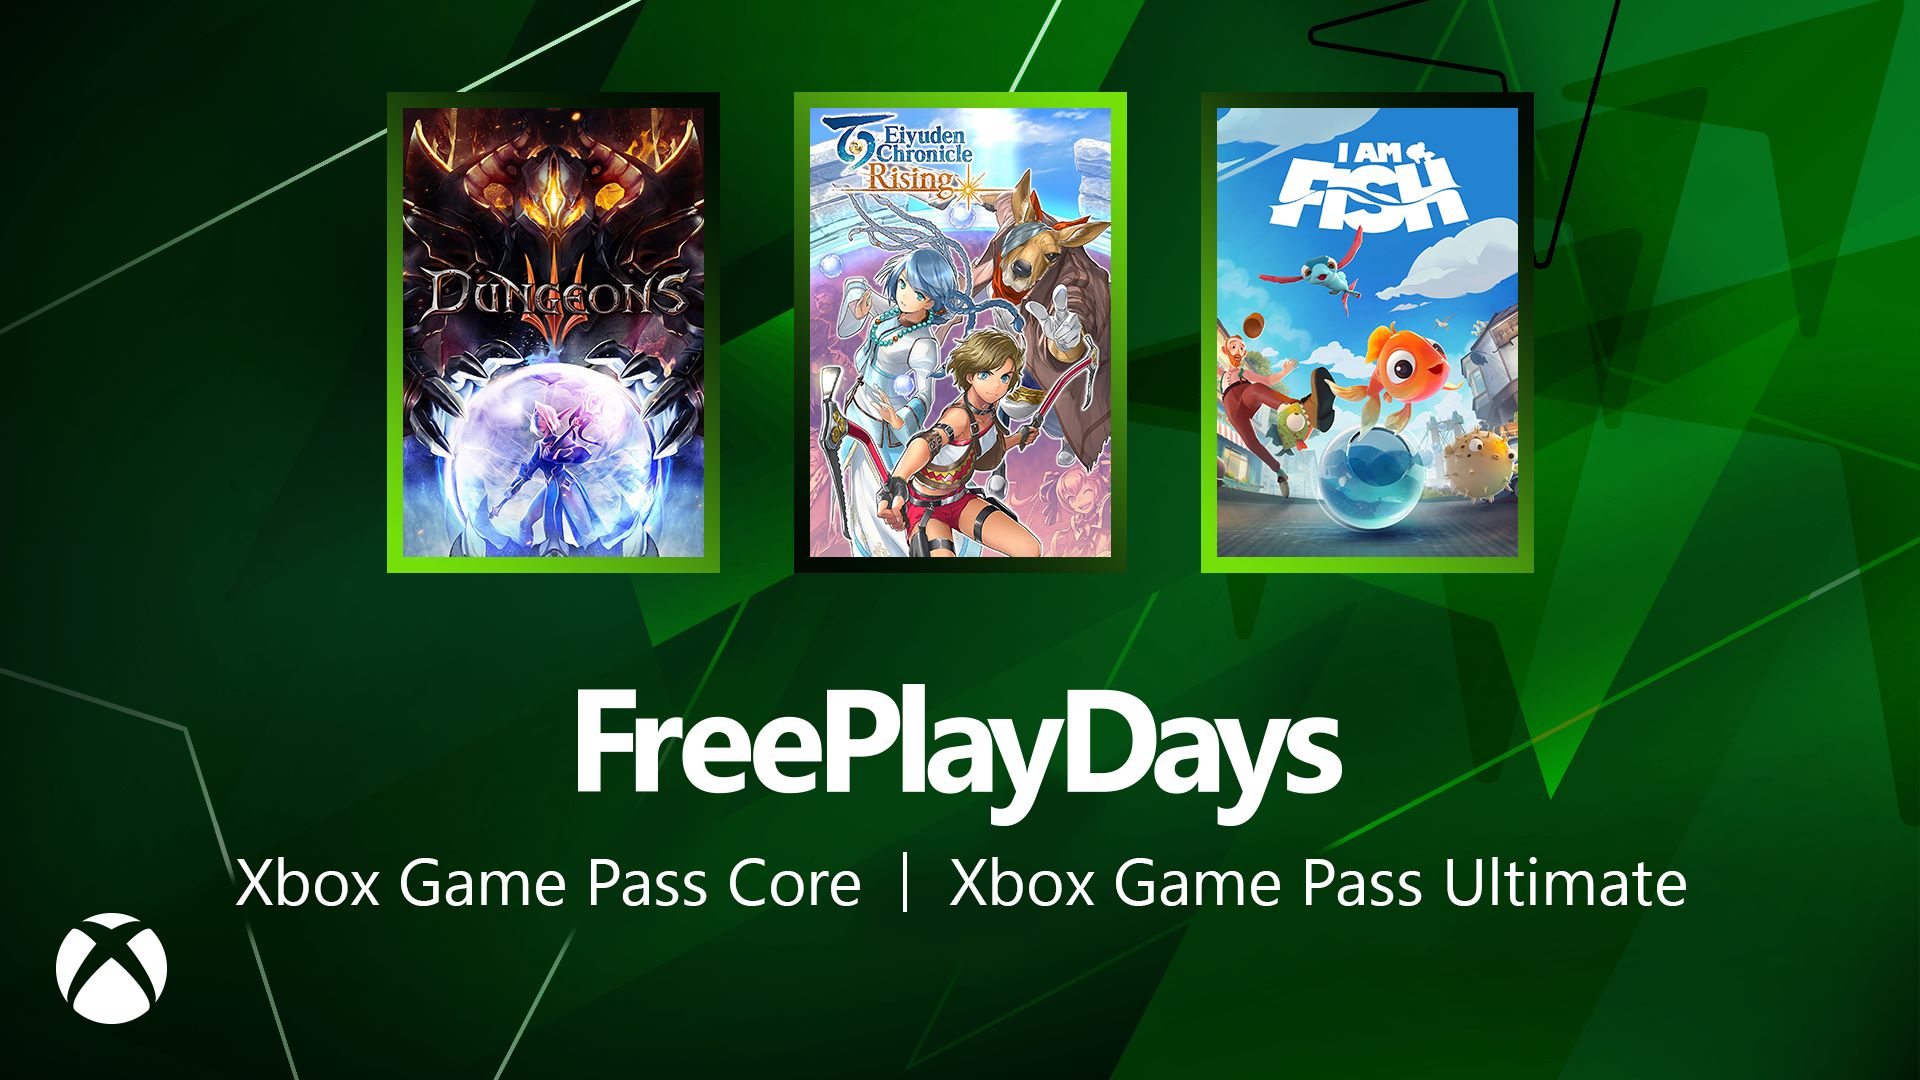 Free Play Days – Dungeons 3, Eiyuden Chronicle: Rising and I Am Fish